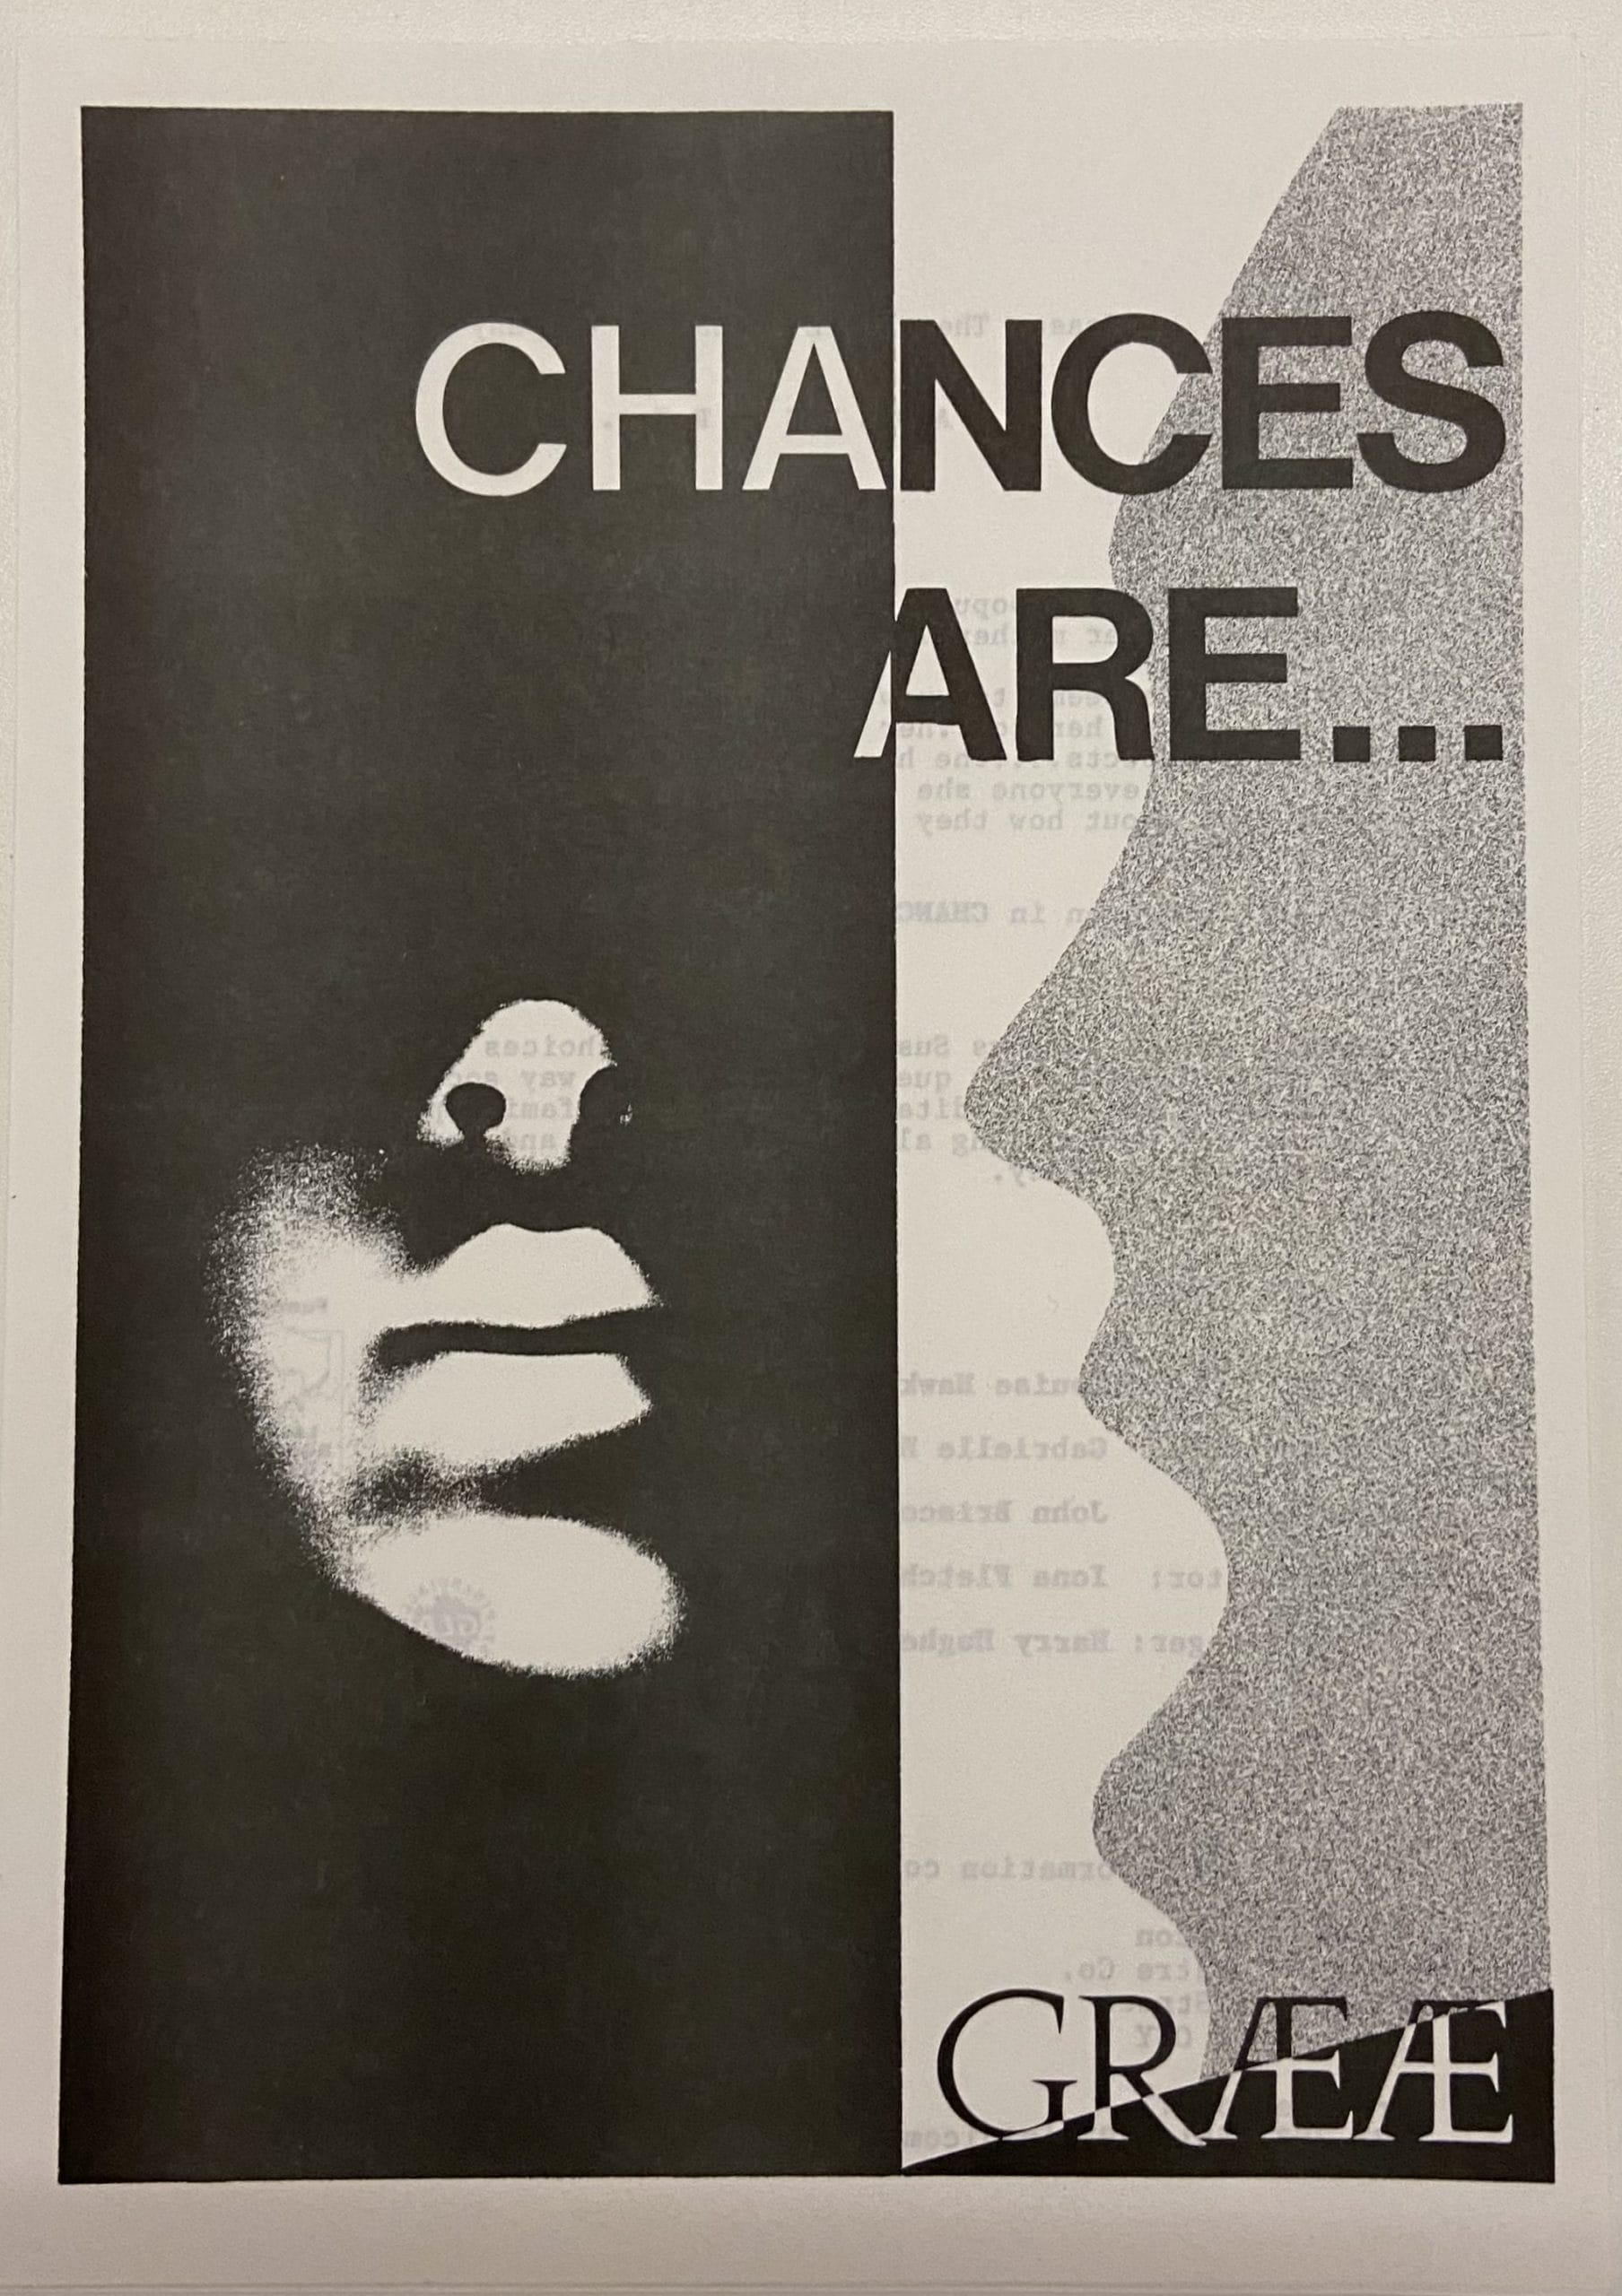 Simple black and white poster for Graeae's 'Chances Are...'